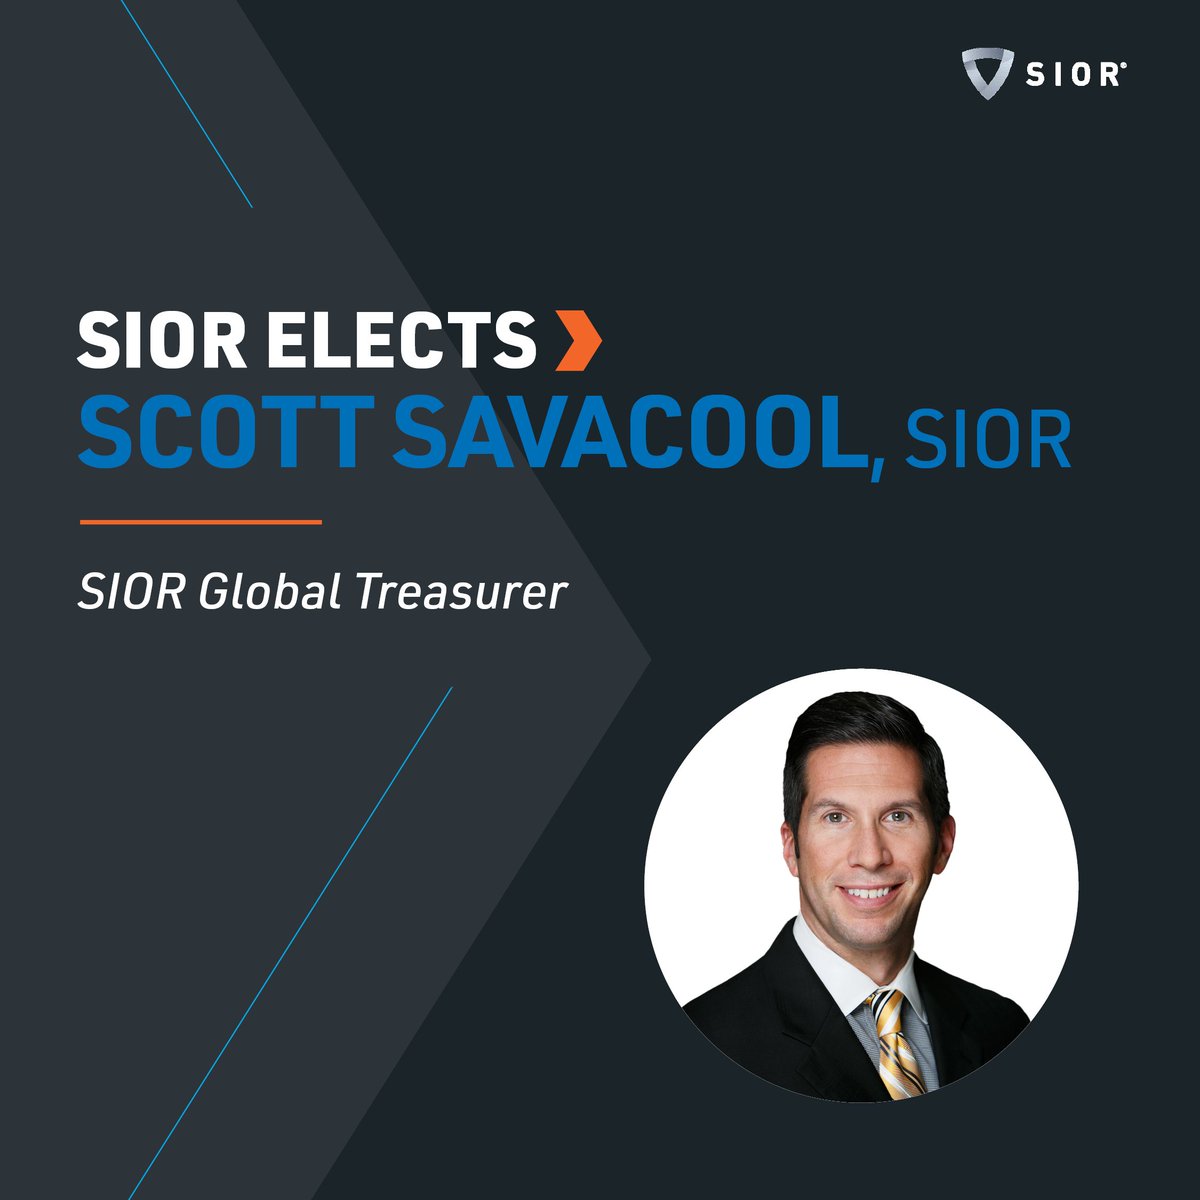 Excited to congratulate Scott Savacool, SIOR, for being officially elected to serve as SIOR Treasurer for a two-year term. With his 20+ years of #CRE experience, we are looking forward to seeing all that he will do for the organization when he is inducted this fall.